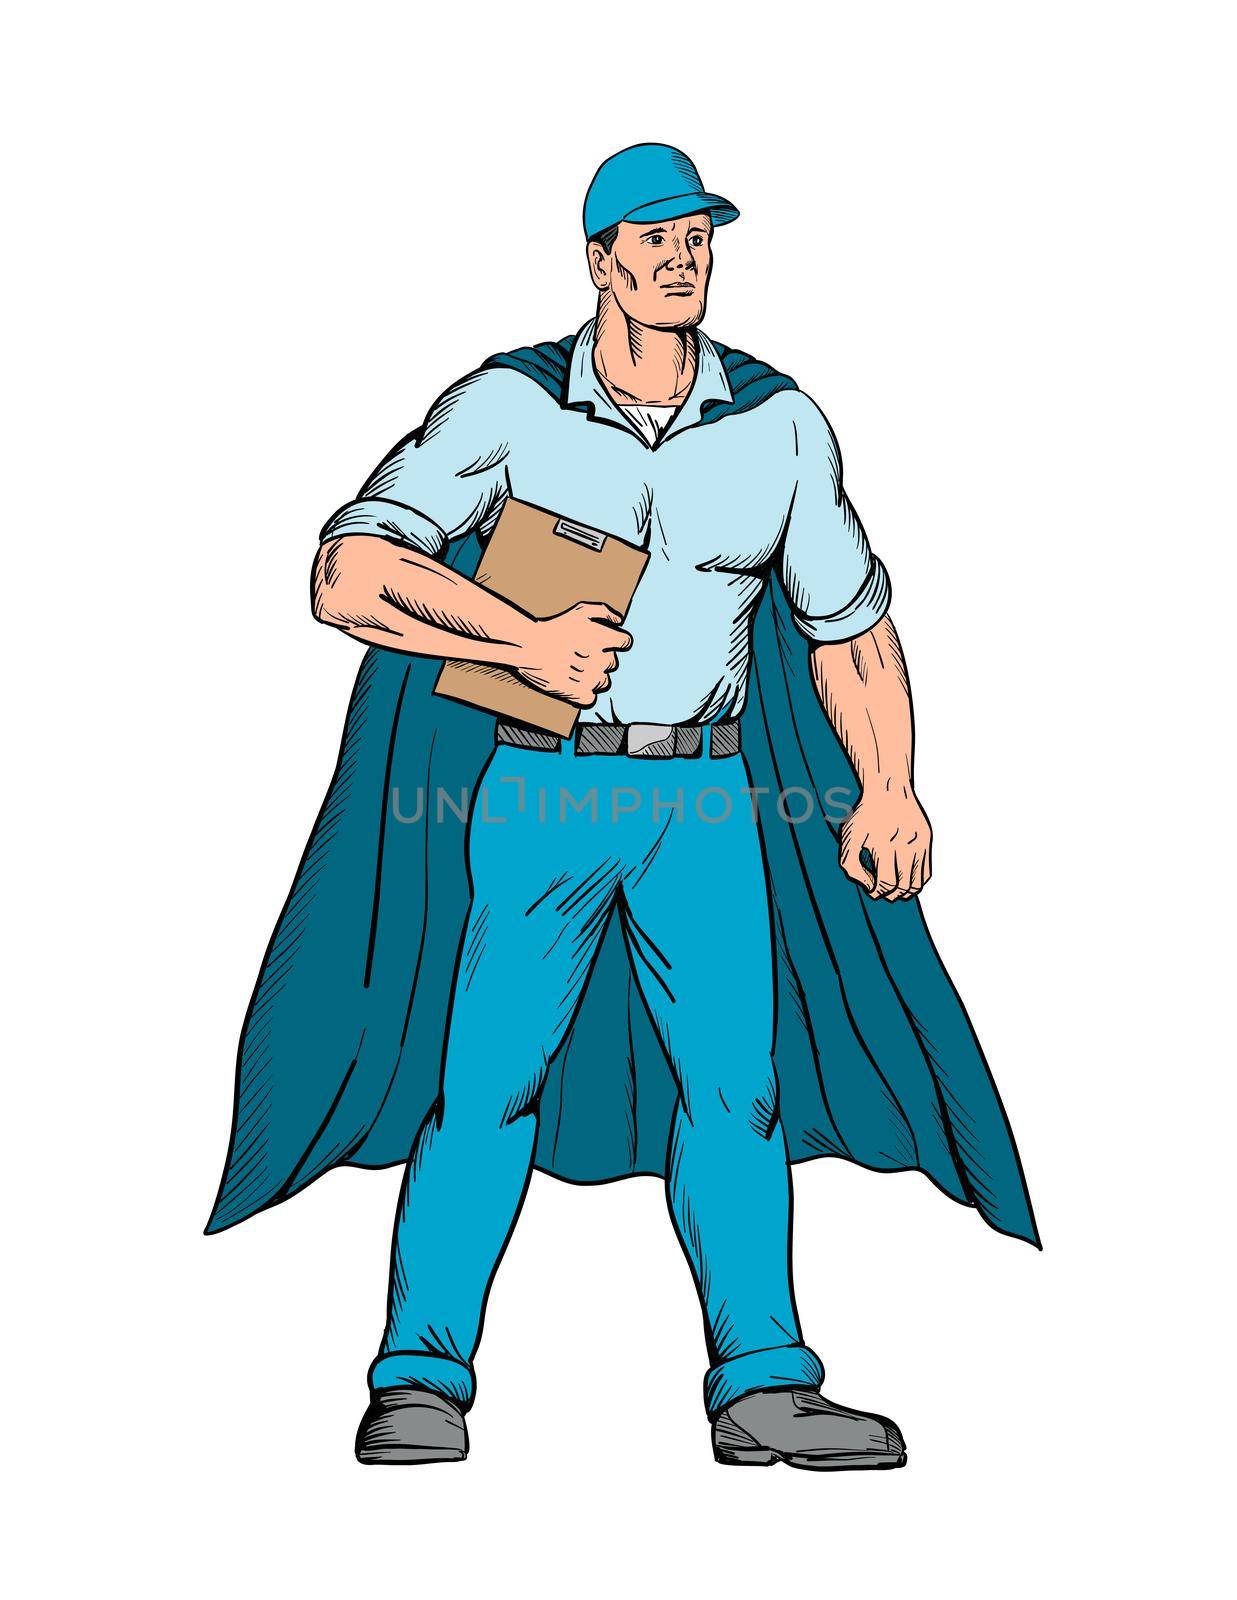 Cartoon style illustration of a worker as a superhero wearing a cape and holding a clipboard standing viewed from front on isolated background done in full color.